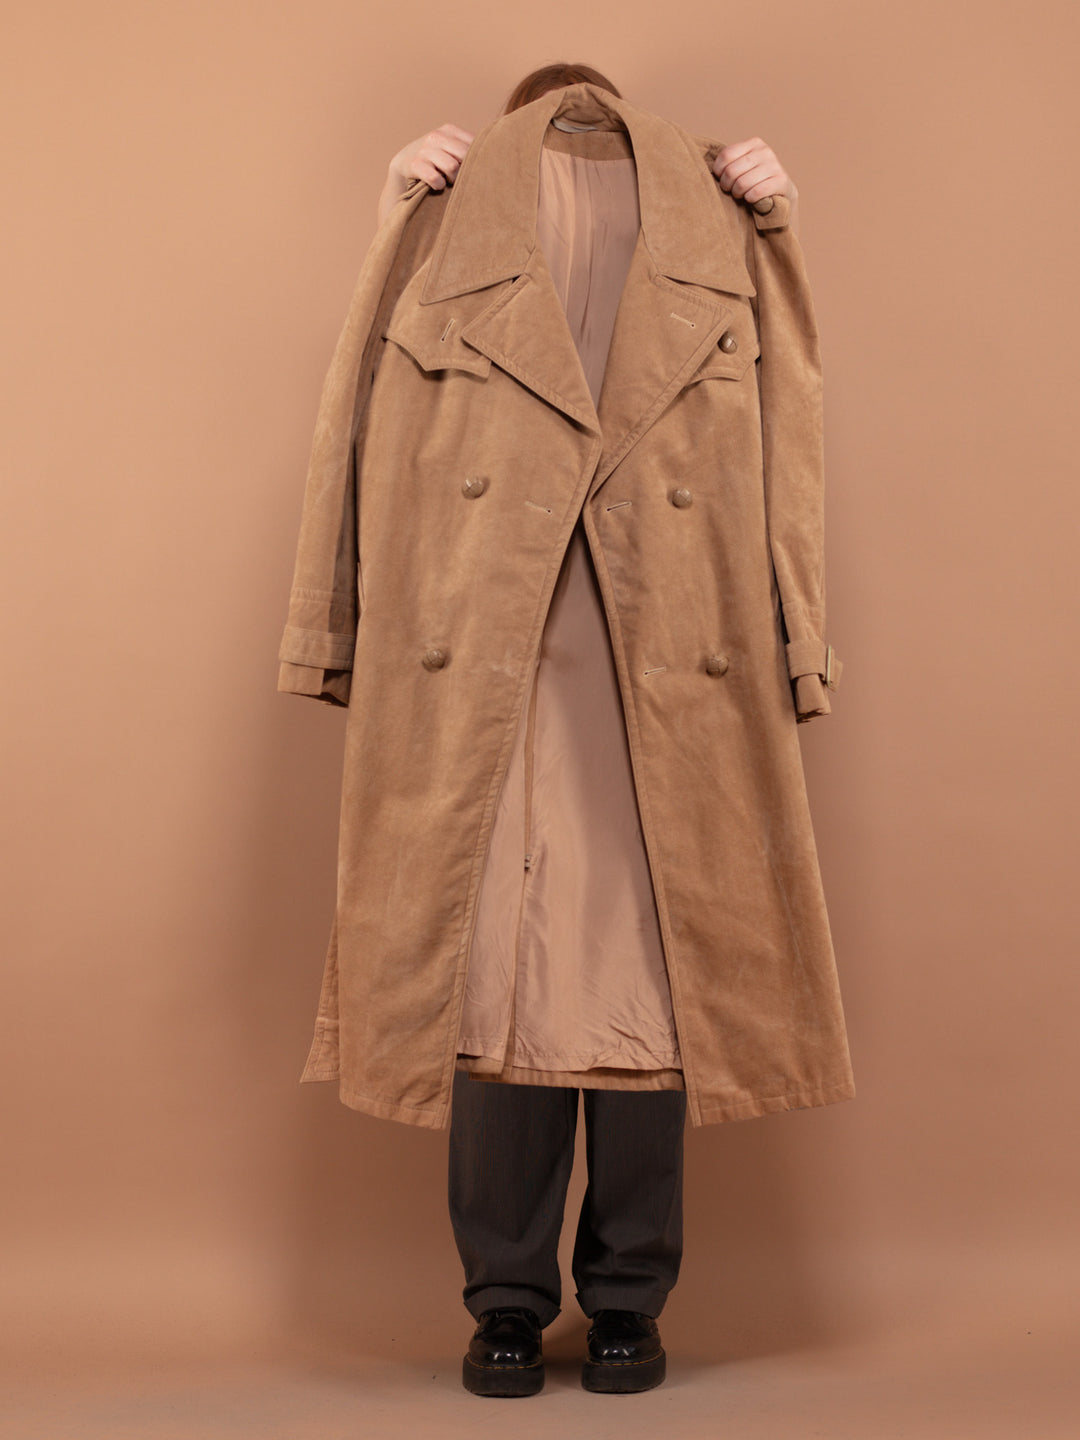 Faux Suede Trench Coat 90's, Size XL Beige Trench Coat, Double Breasted Coat, Urban Trench Coat, Commuter Trench Coat, Minimalist Outerwear